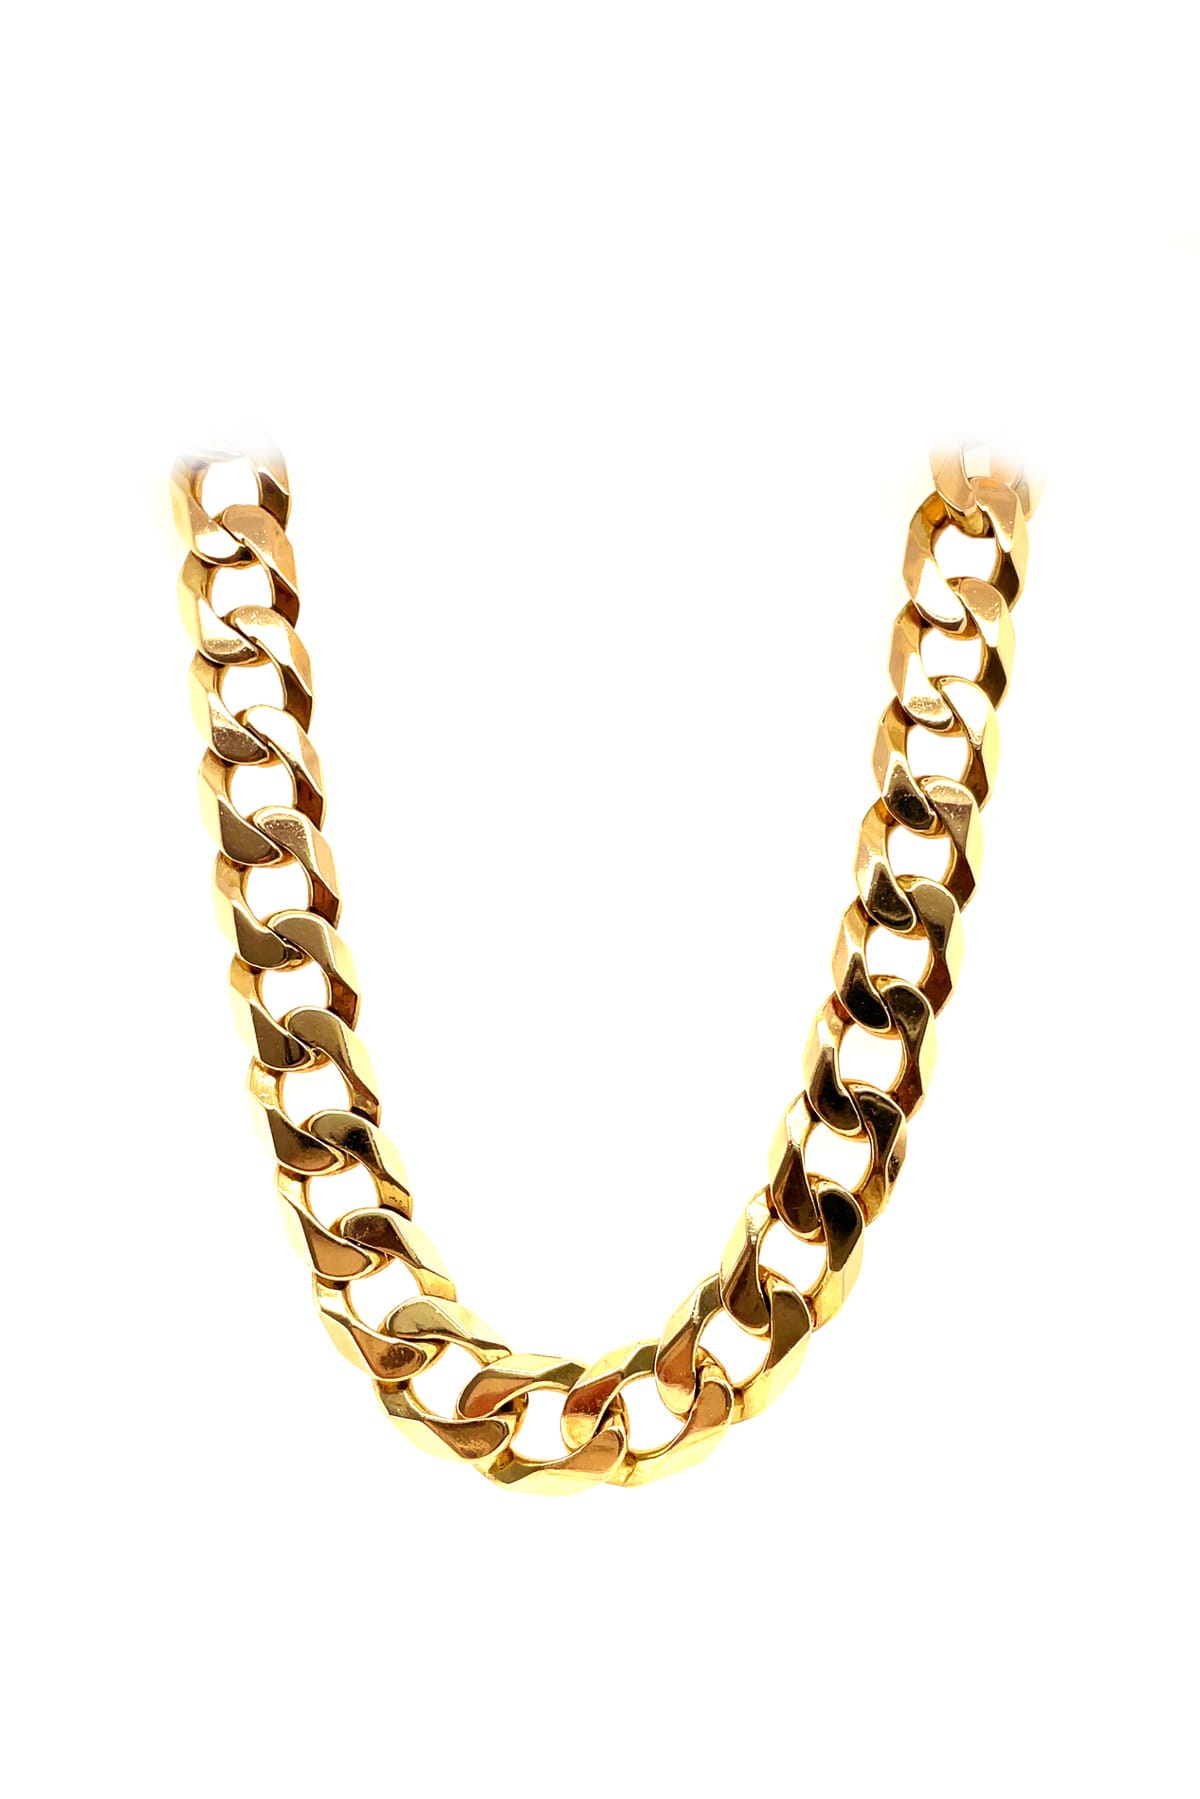 Solid Yellow Gold Bevelled Curb Link Chain available at LeGassick Diamonds and Jewellery Gold Coast, Australia.